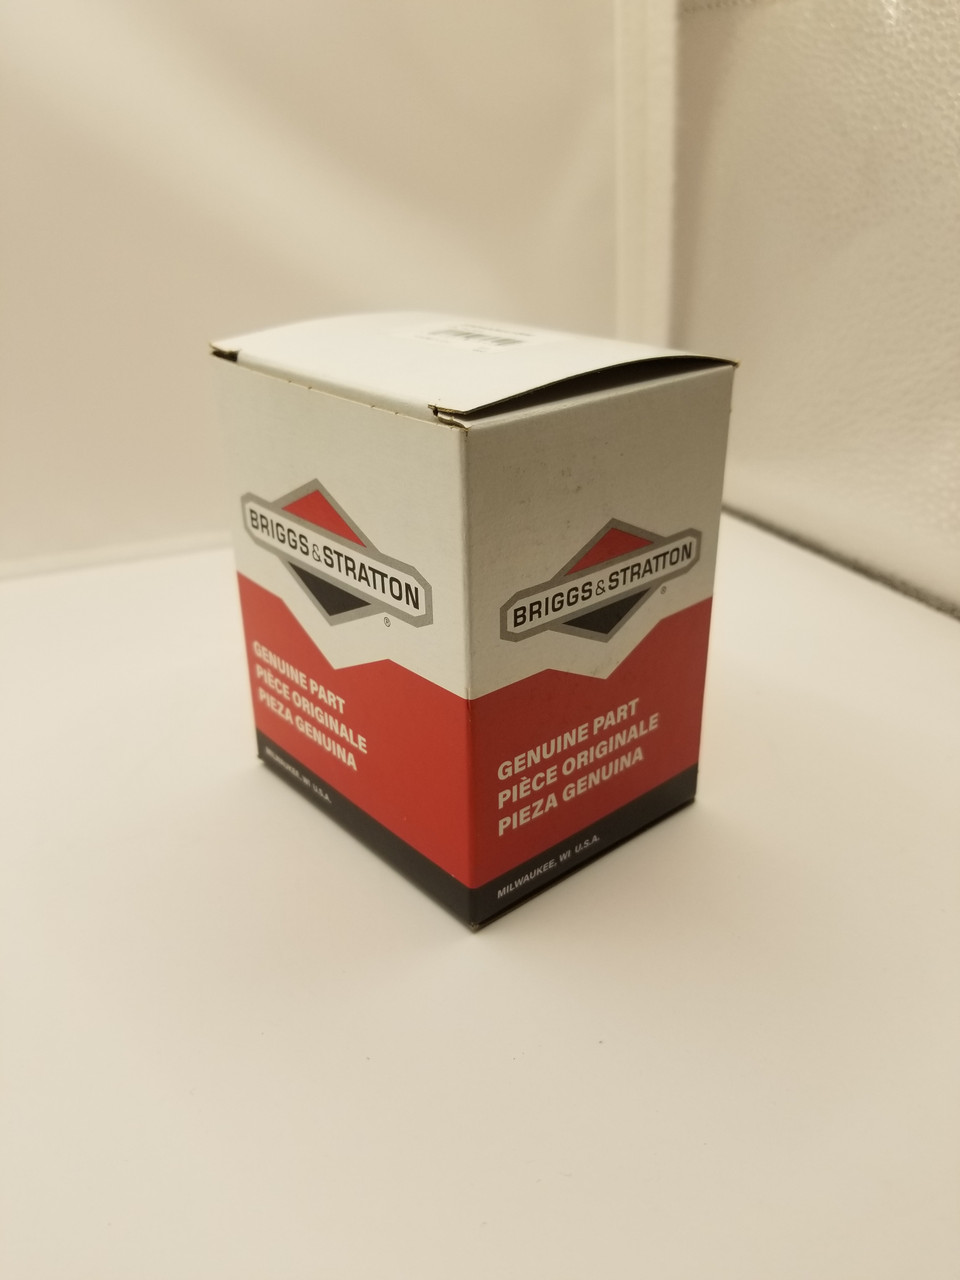 ENGINE PACKED SINGLE CARTON - 12G032-0001-G1 package std